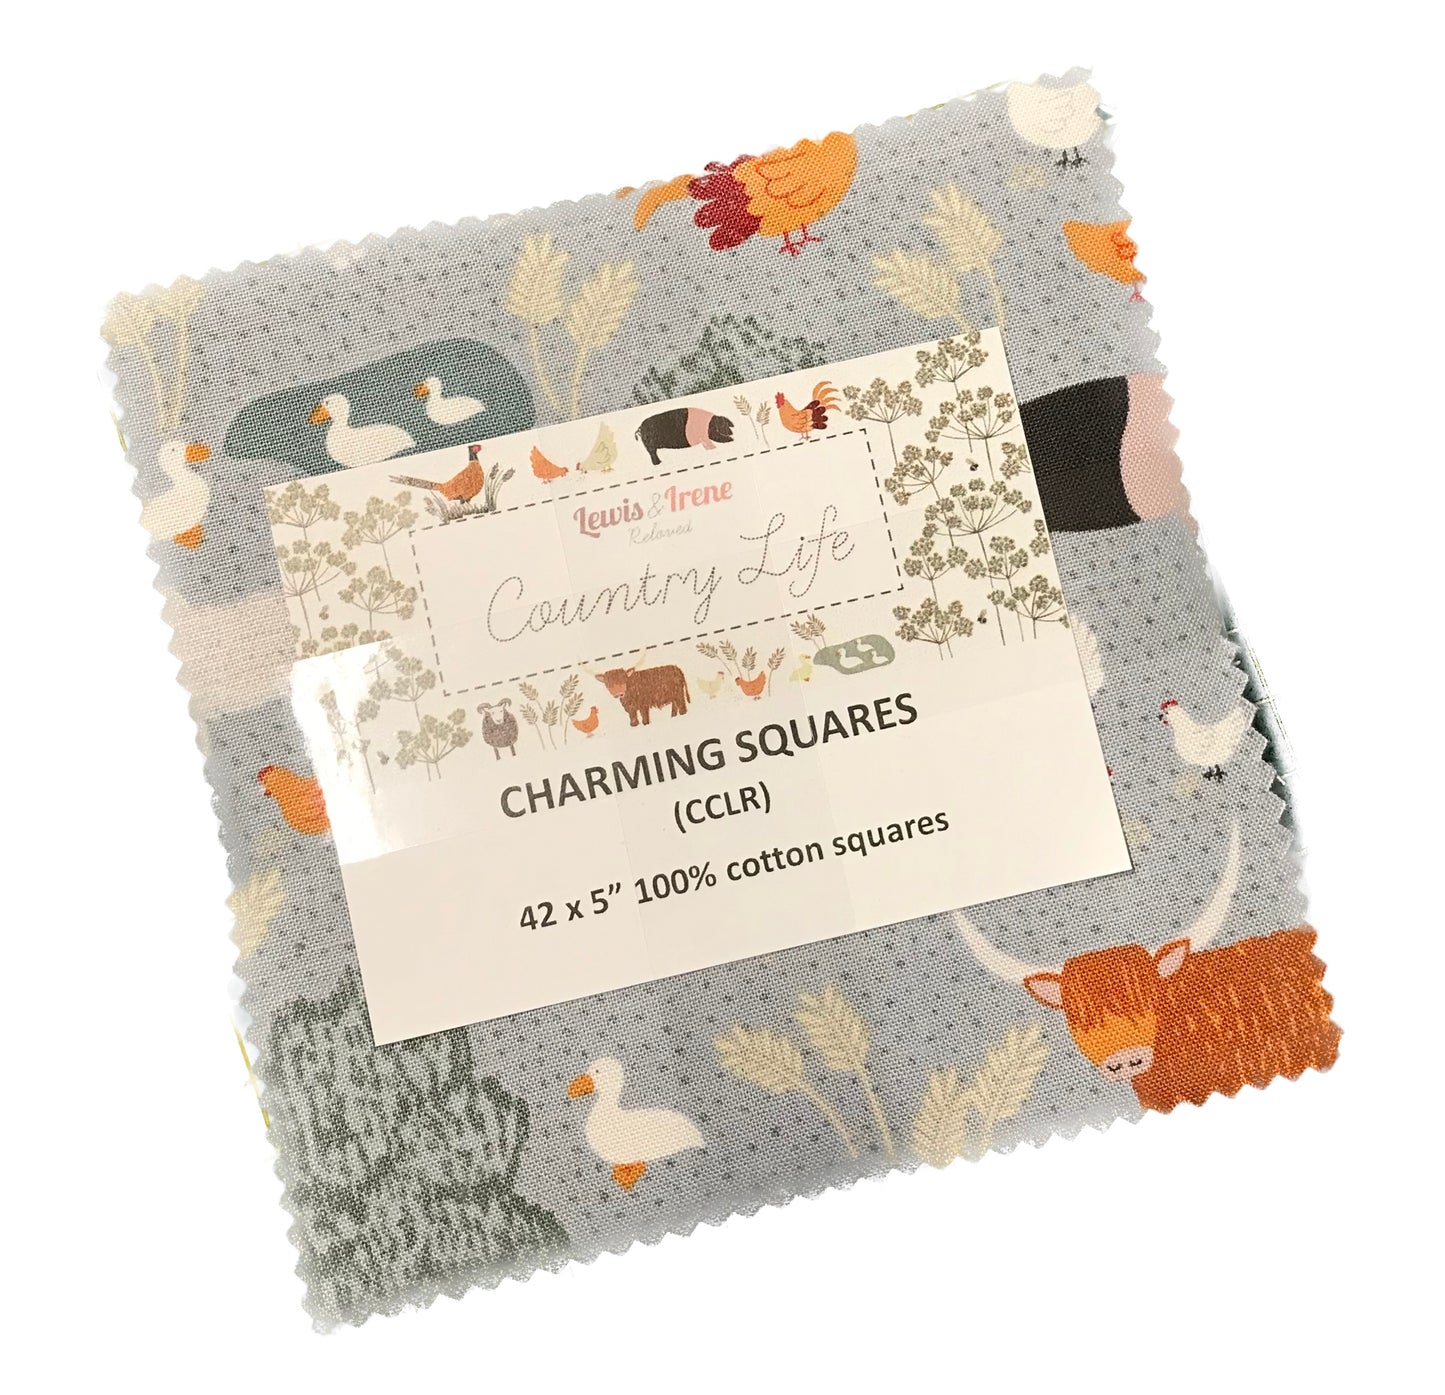 Charming Squares by lewis and Irene - Country Life